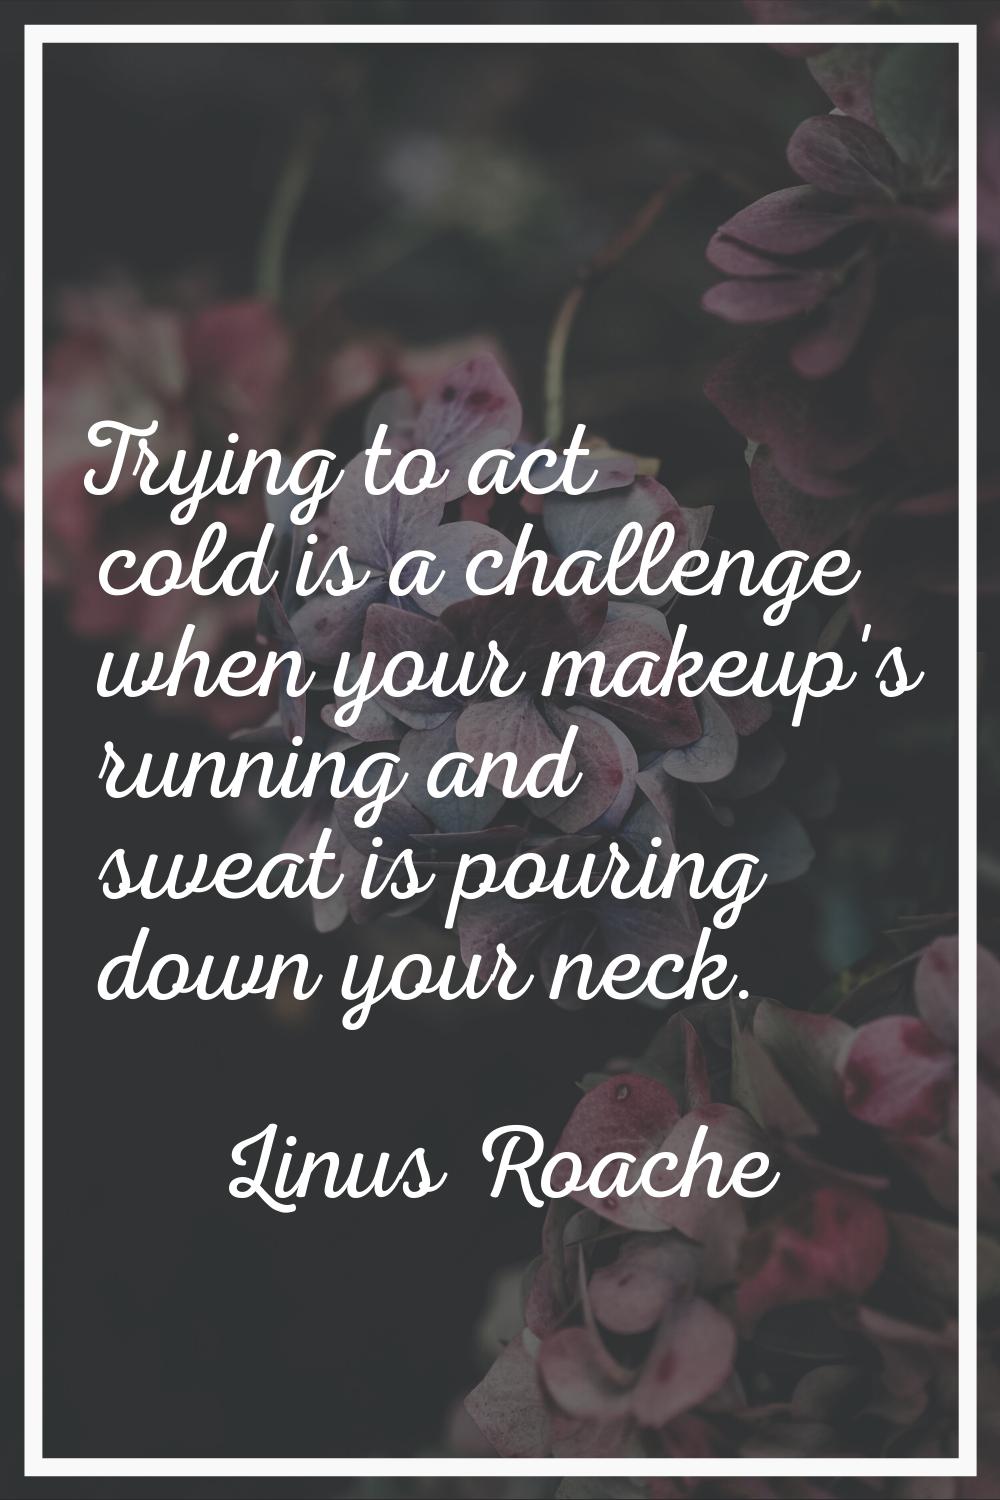 Trying to act cold is a challenge when your makeup's running and sweat is pouring down your neck.